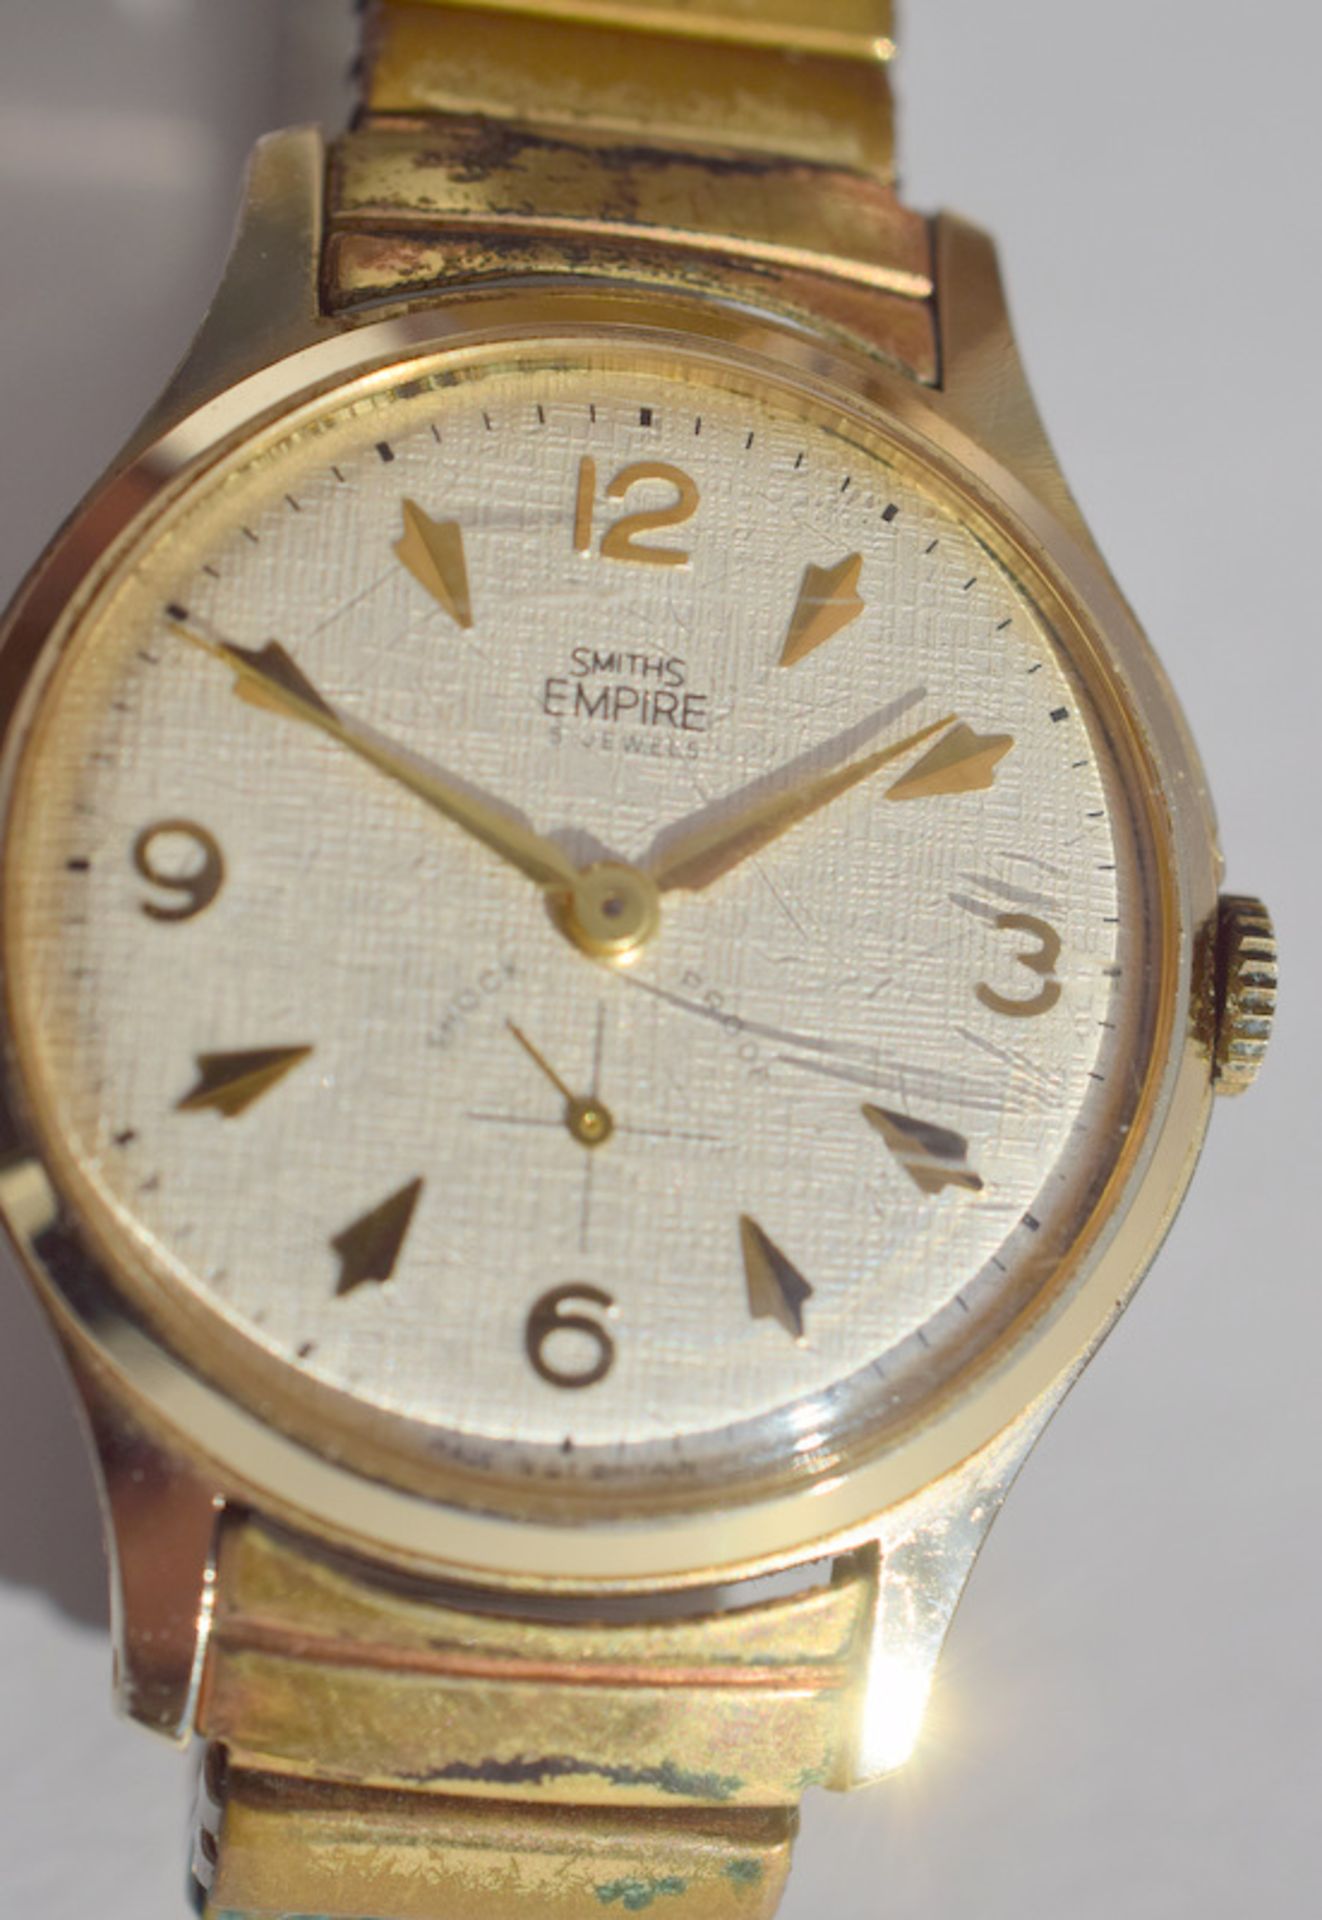 Smiths Empire Watch - Image 3 of 3